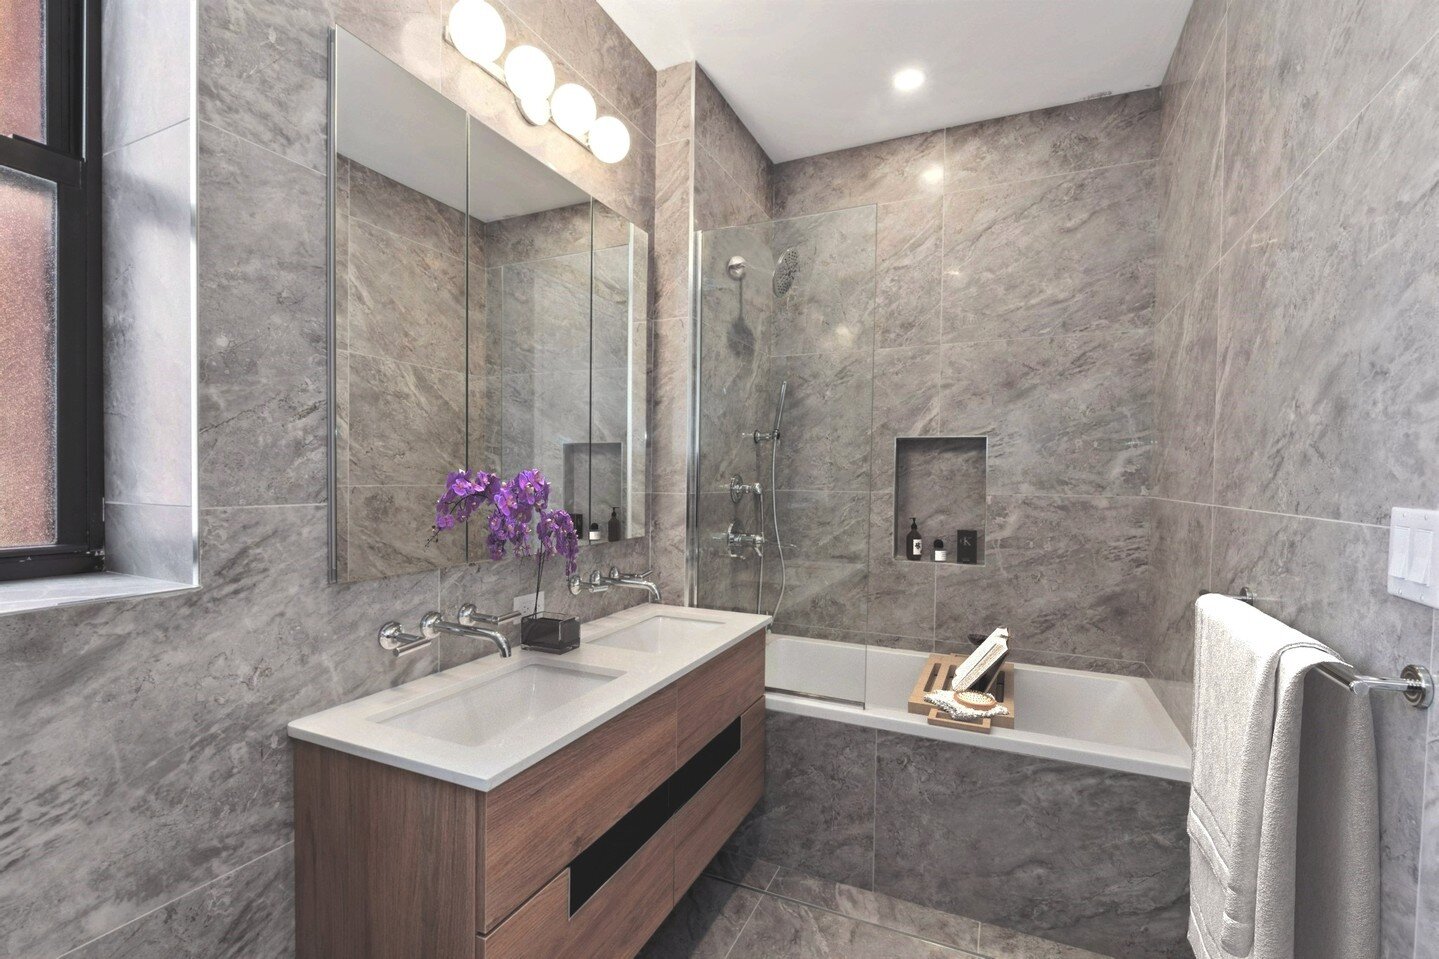 A classic new bathroom, recently built for one of our luxury rentals buildings.